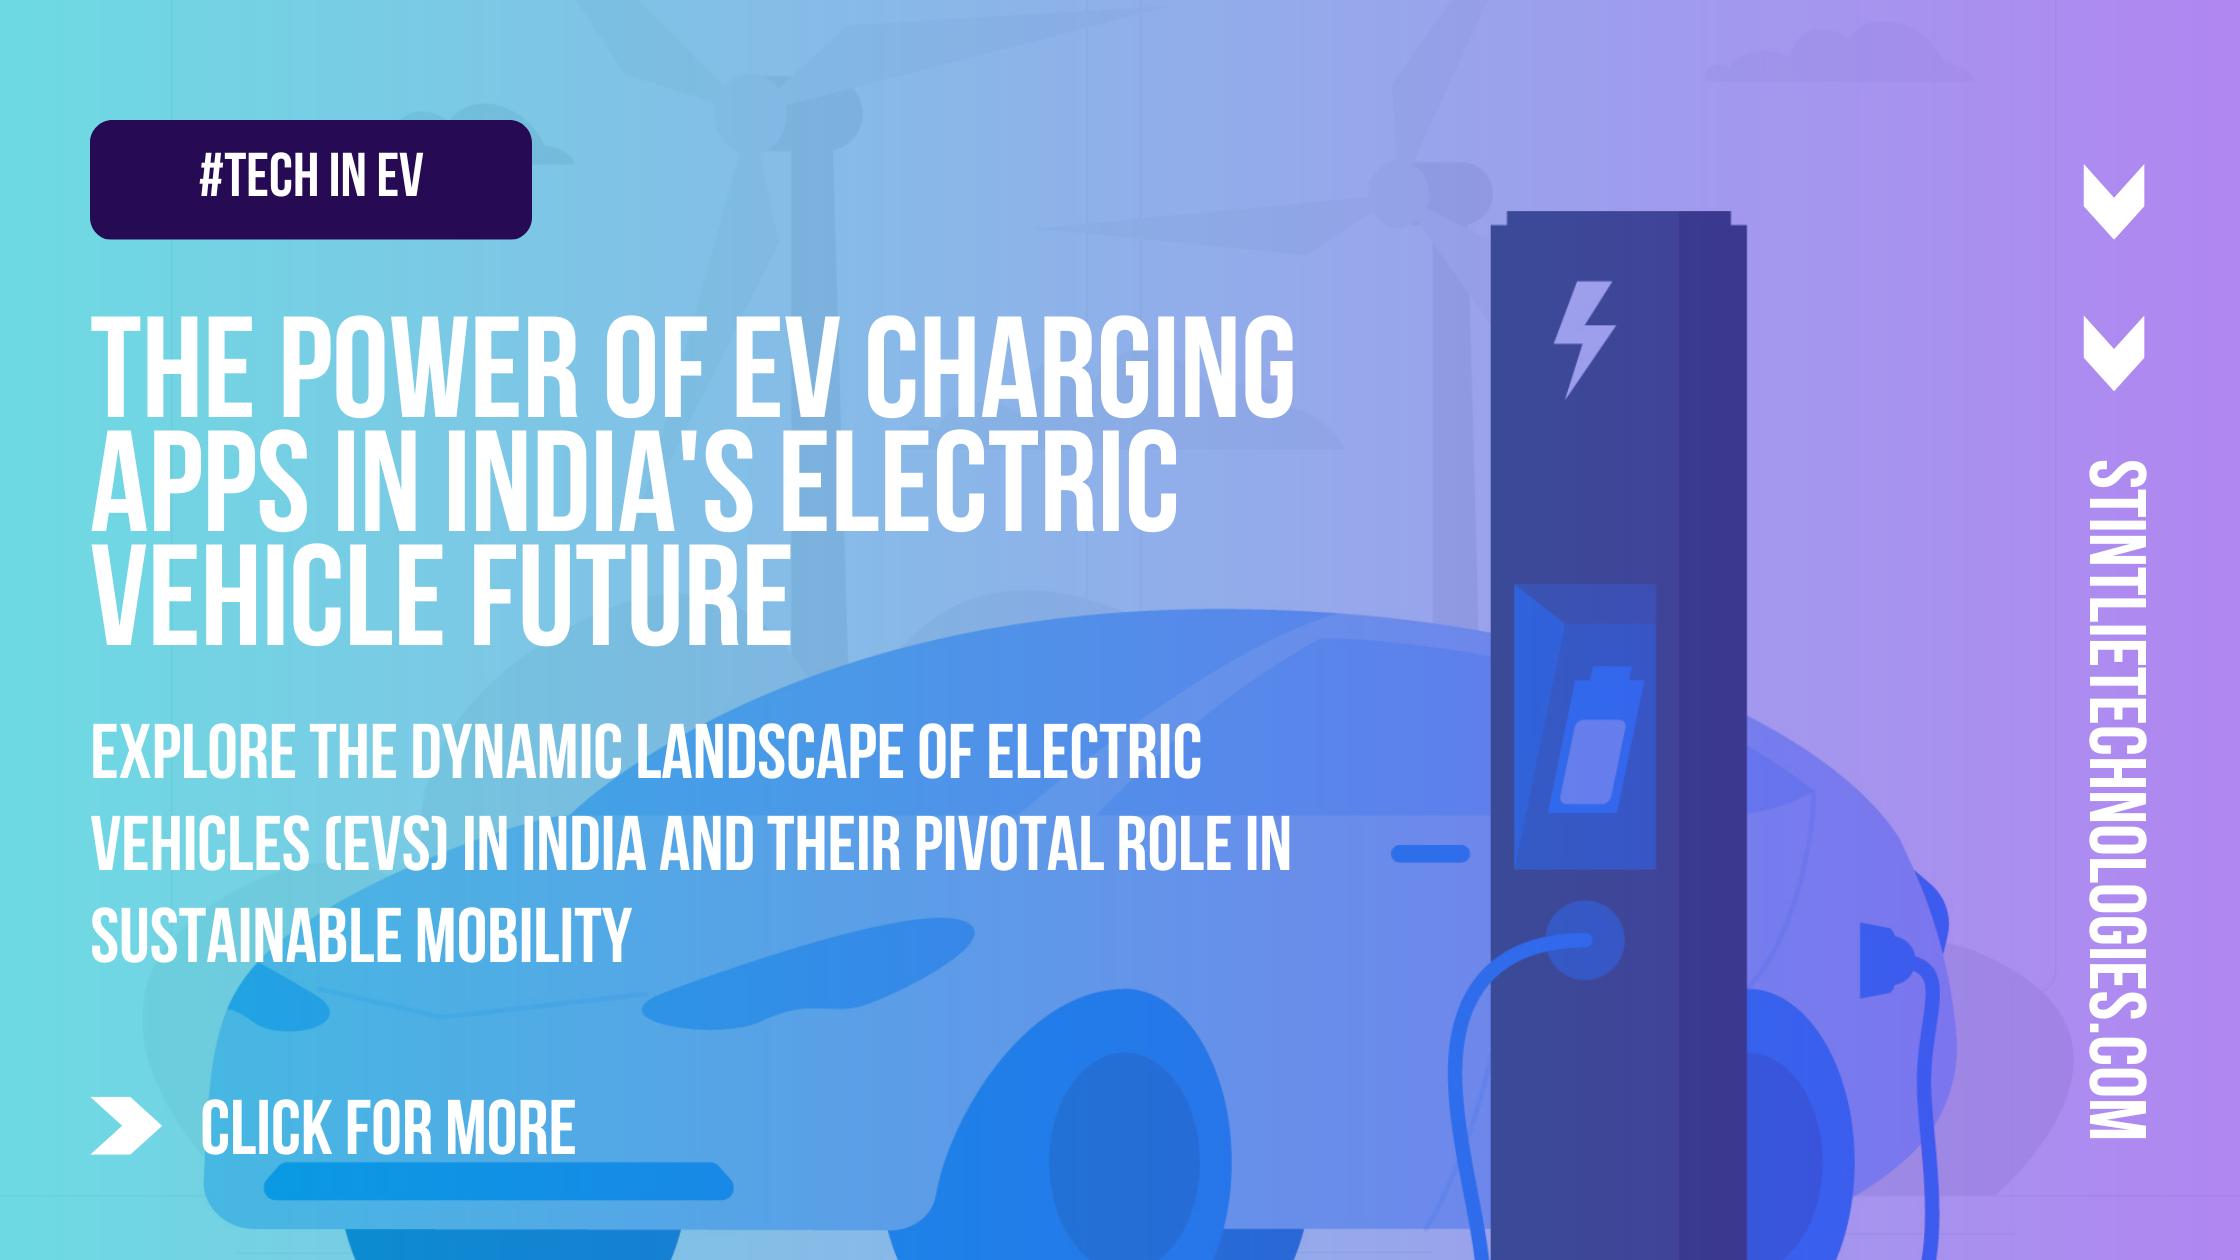 Explore the dynamic landscape of Electric Vehicles (EVs) in India and their pivotal role in sustainable mobility